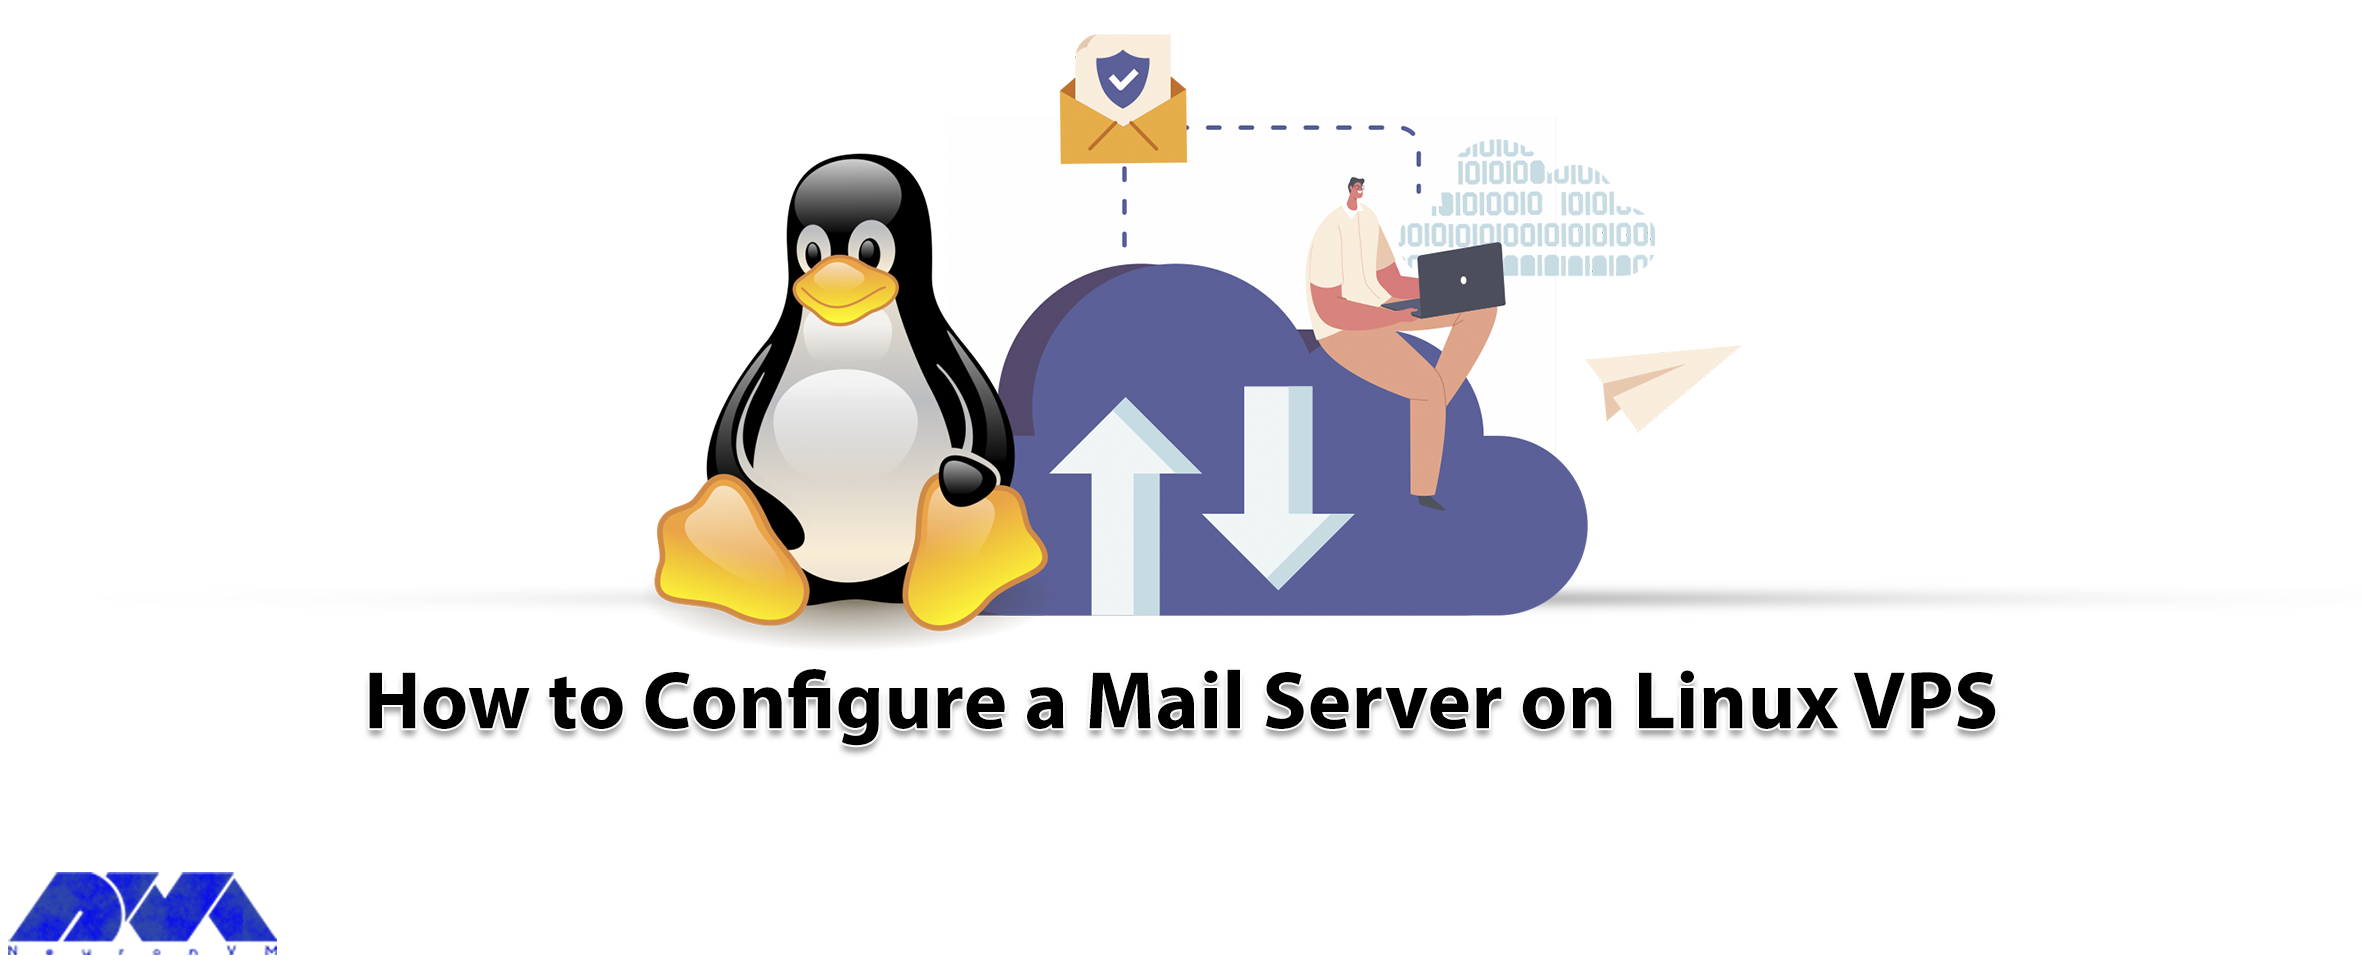 How to Configure a Mail Server on Linux VPS - NeuronVM